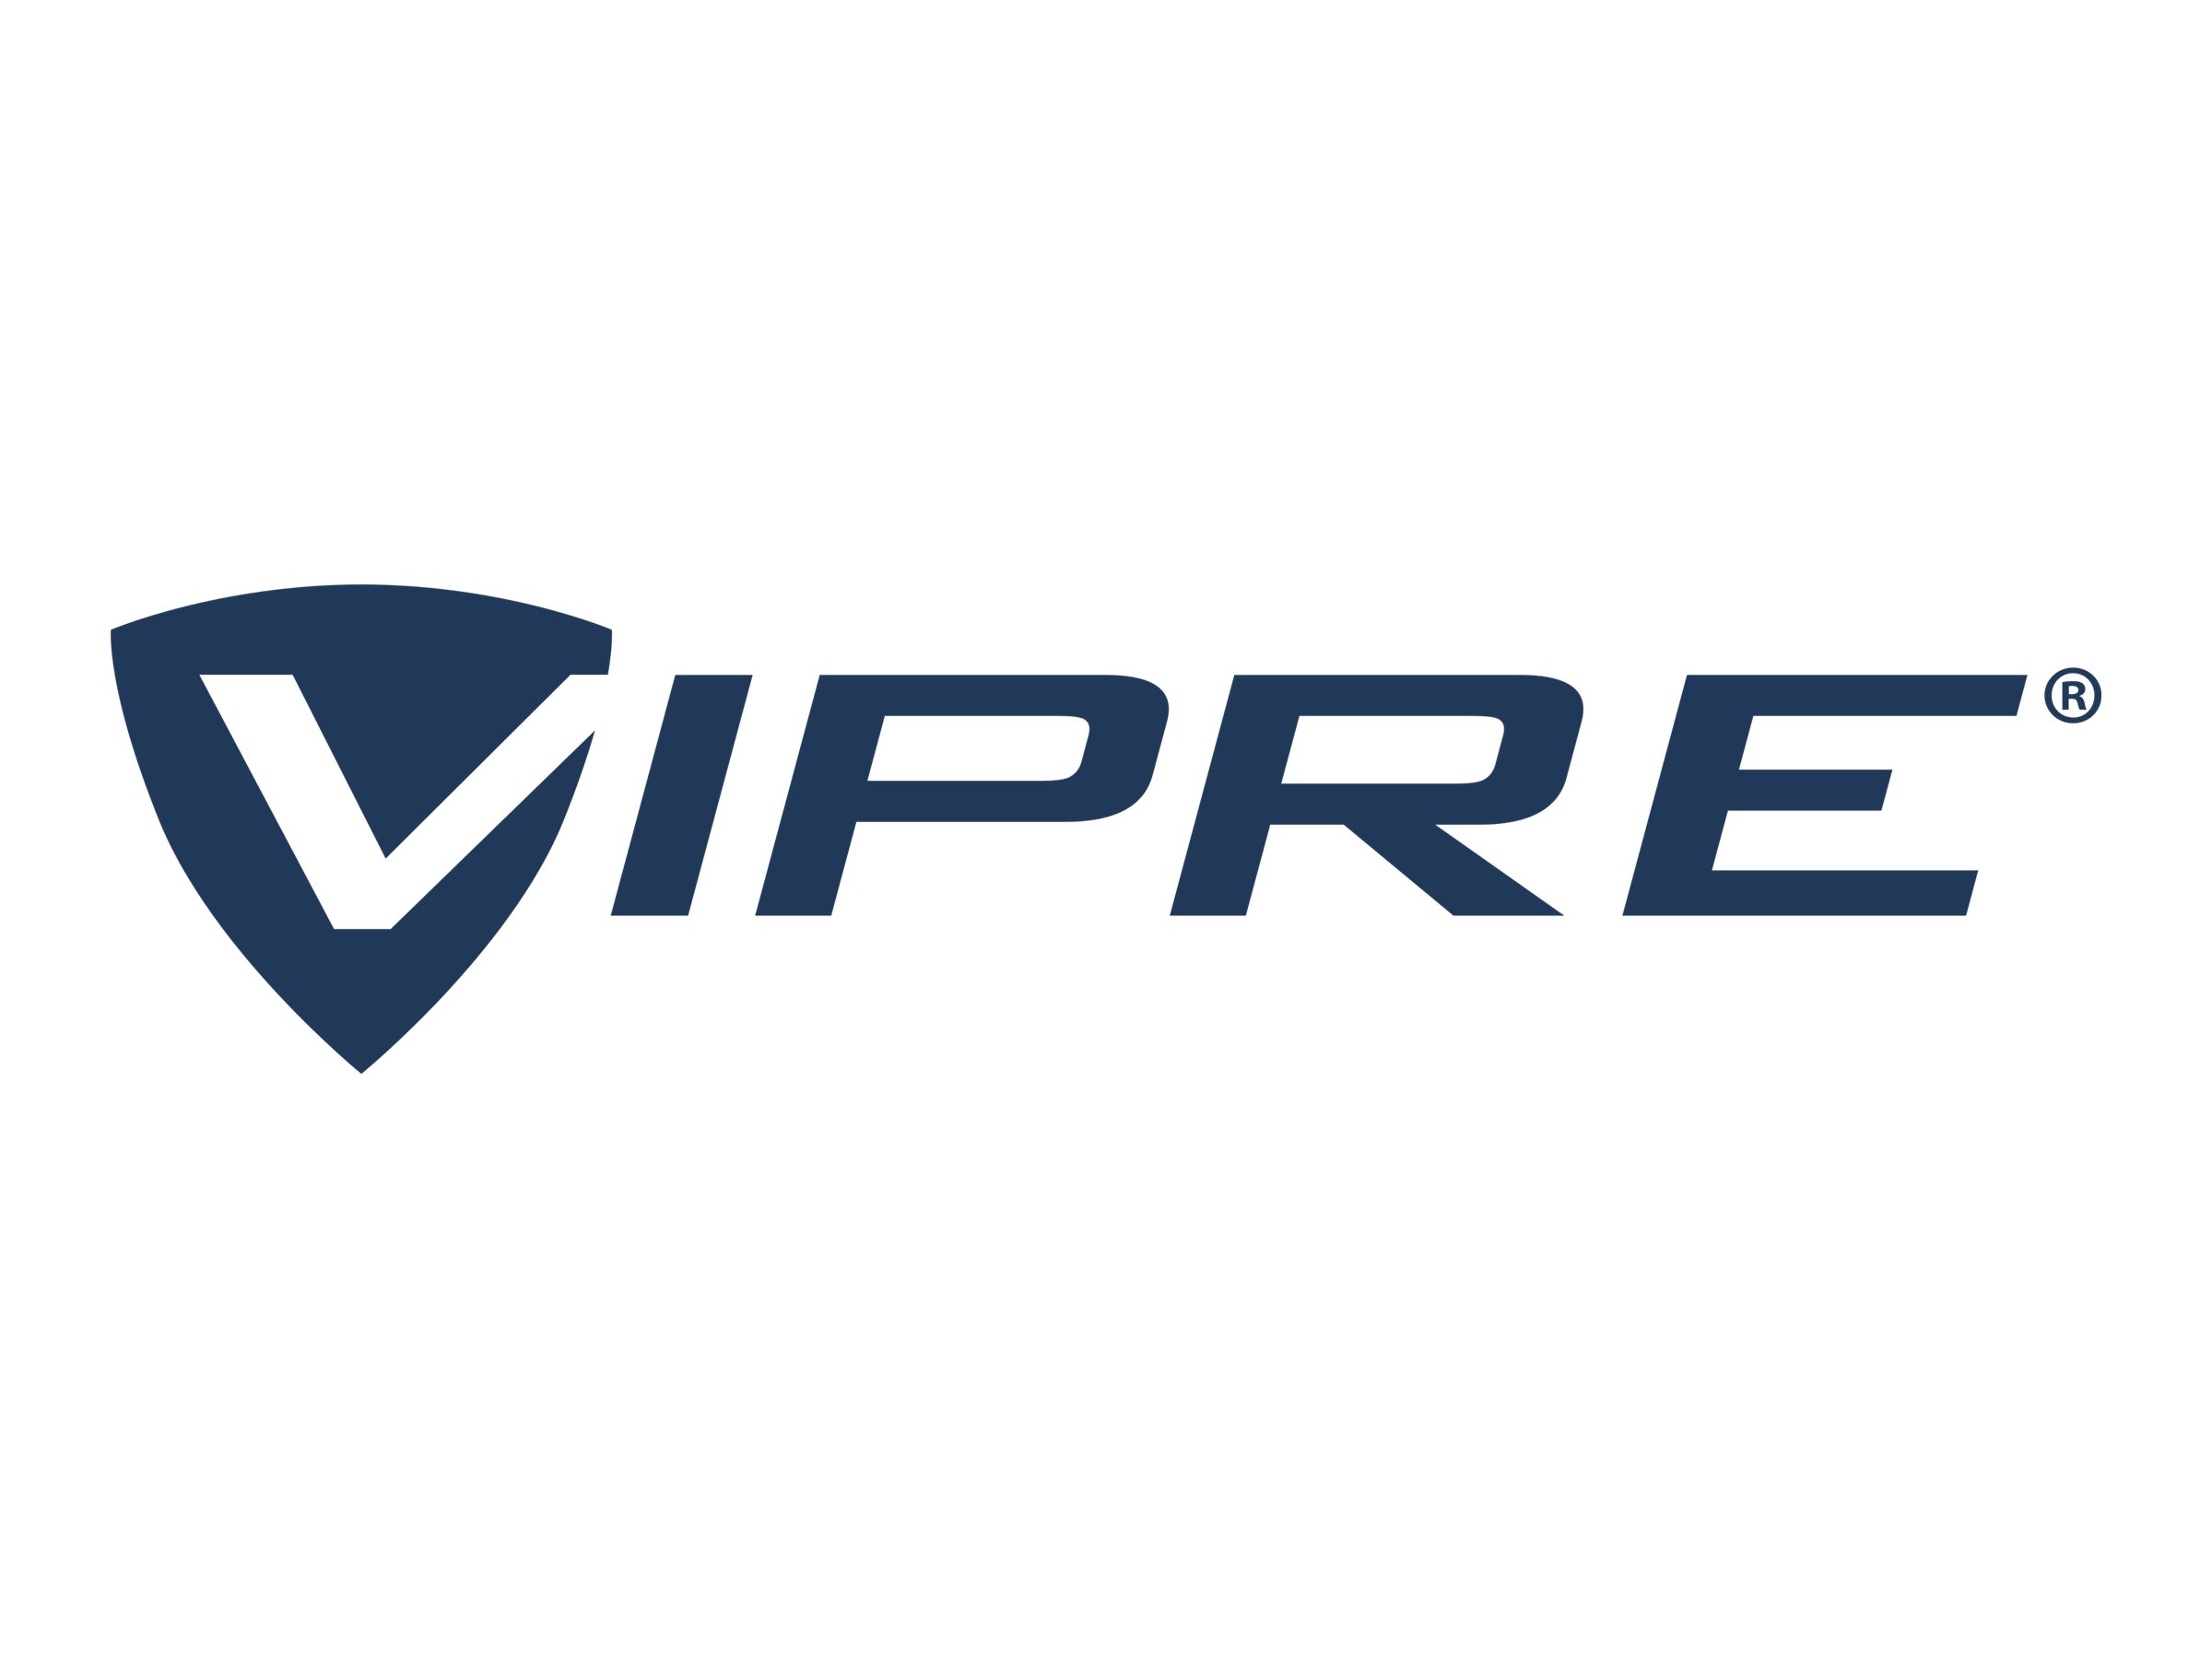 VIPRE FOR HYPER-V HIGH DENSITY MODULE SUBSCRIPTION ADD IN TERM 5-9 HOSTS UP TO 1